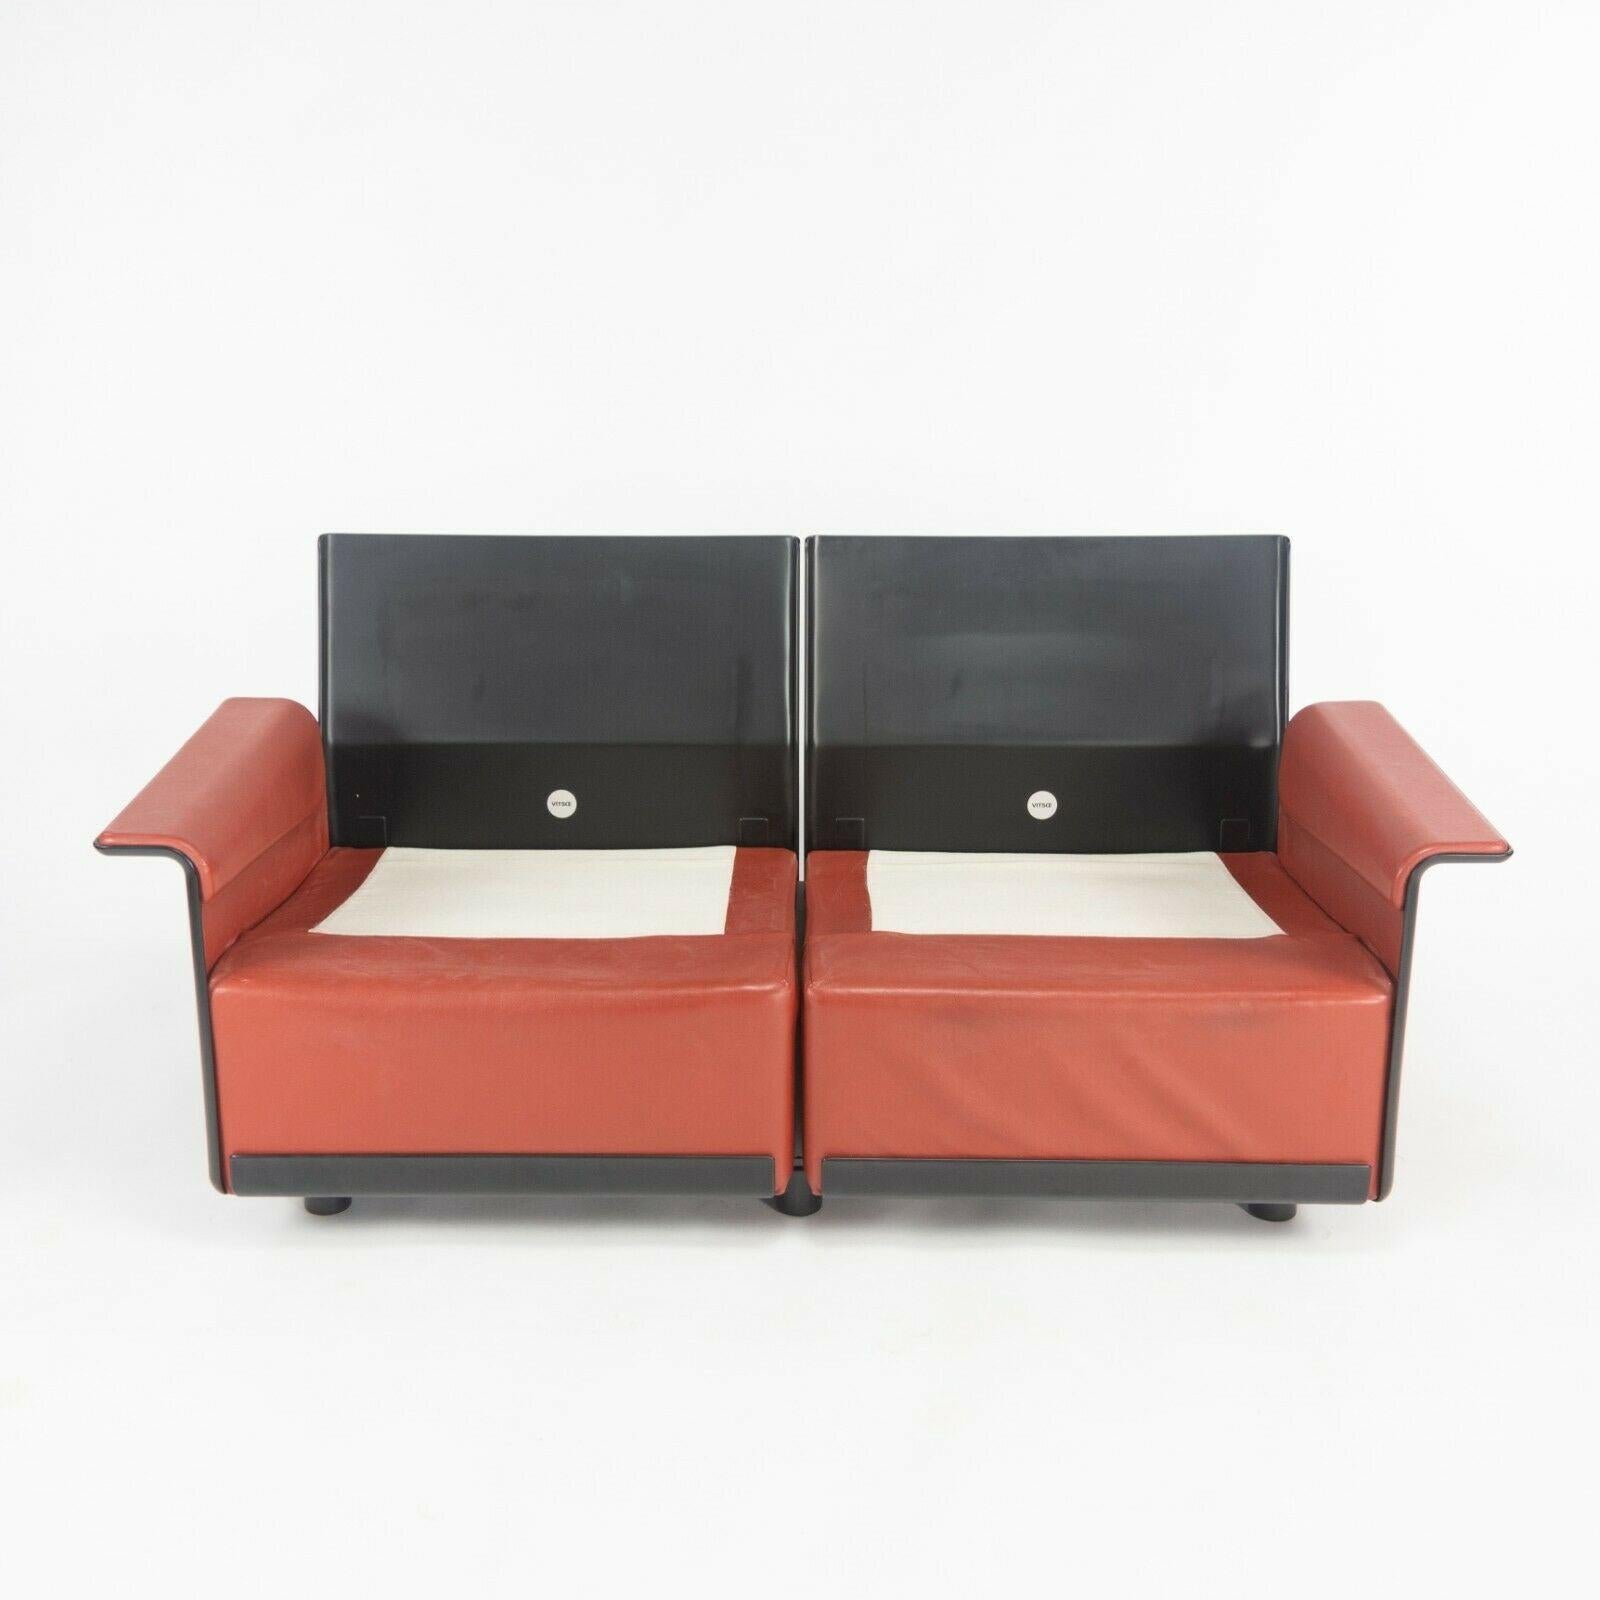 1980s Vintage Dieter Rams for Vitsoe 620 Red Leather and Black Two Seat Settee For Sale 3